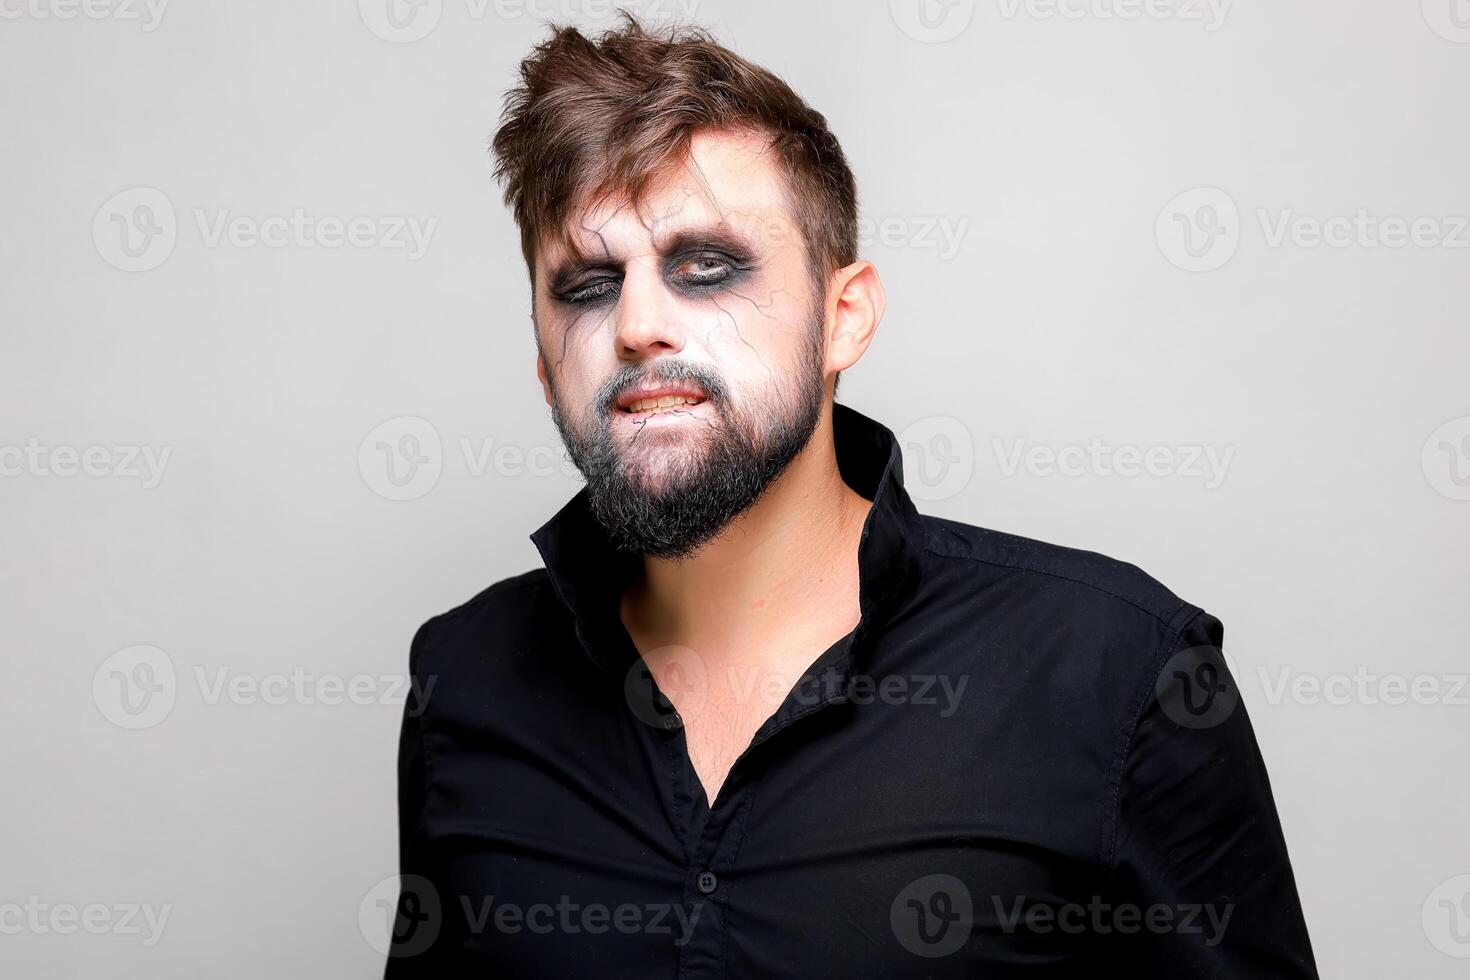 undead makeup for October 31 on a bearded man who shows teeth photo